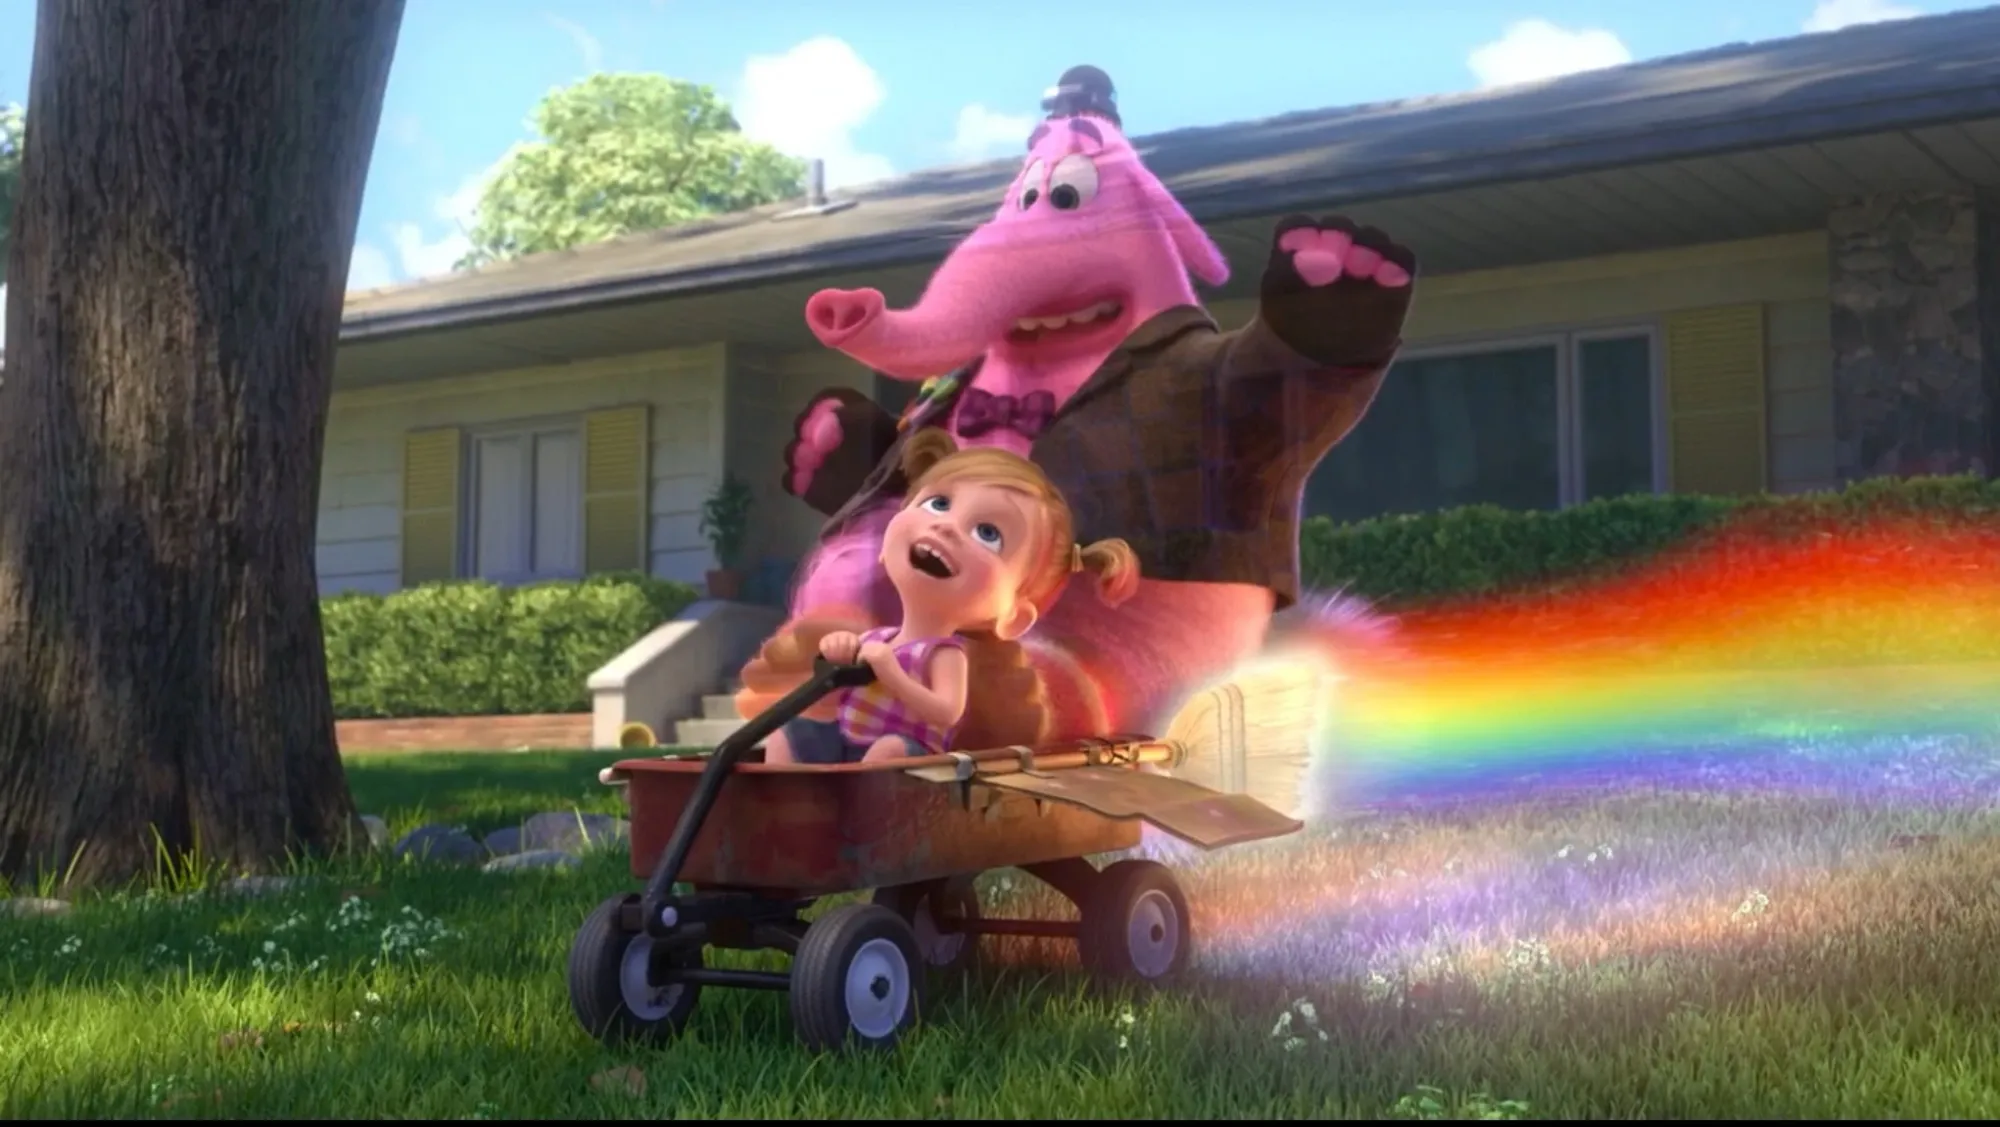 A young Riley rides in a wagon, her imagined Bing Bong behind her. The wagon spouts rainbows.